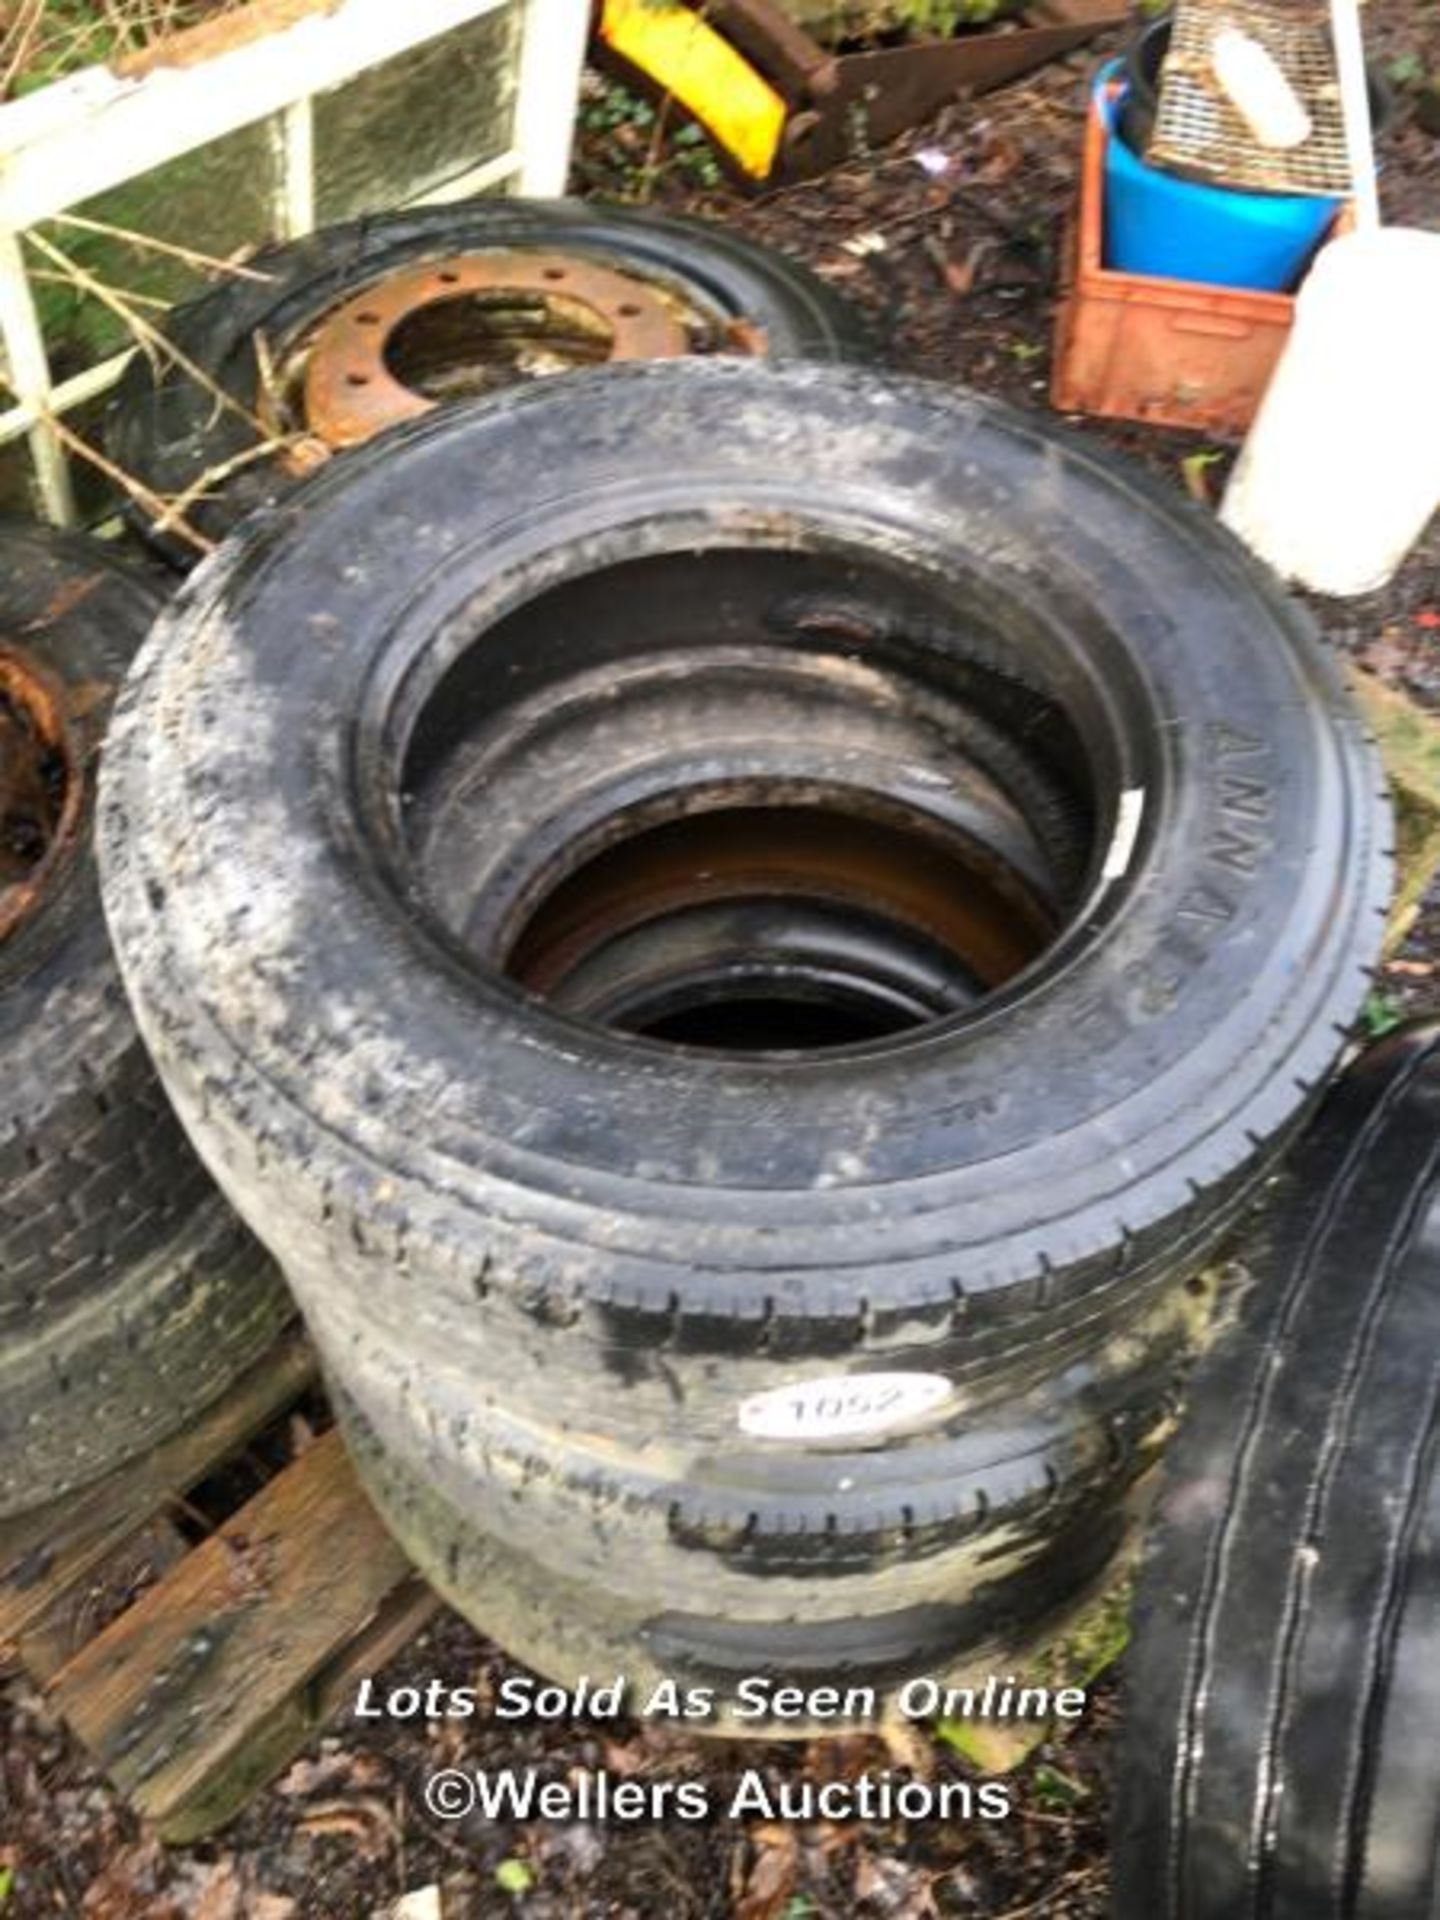 6X WHEELS AND TYRES 24570X17.5 AND 3X TYRES / NO VAT ON HAMMER PRICE